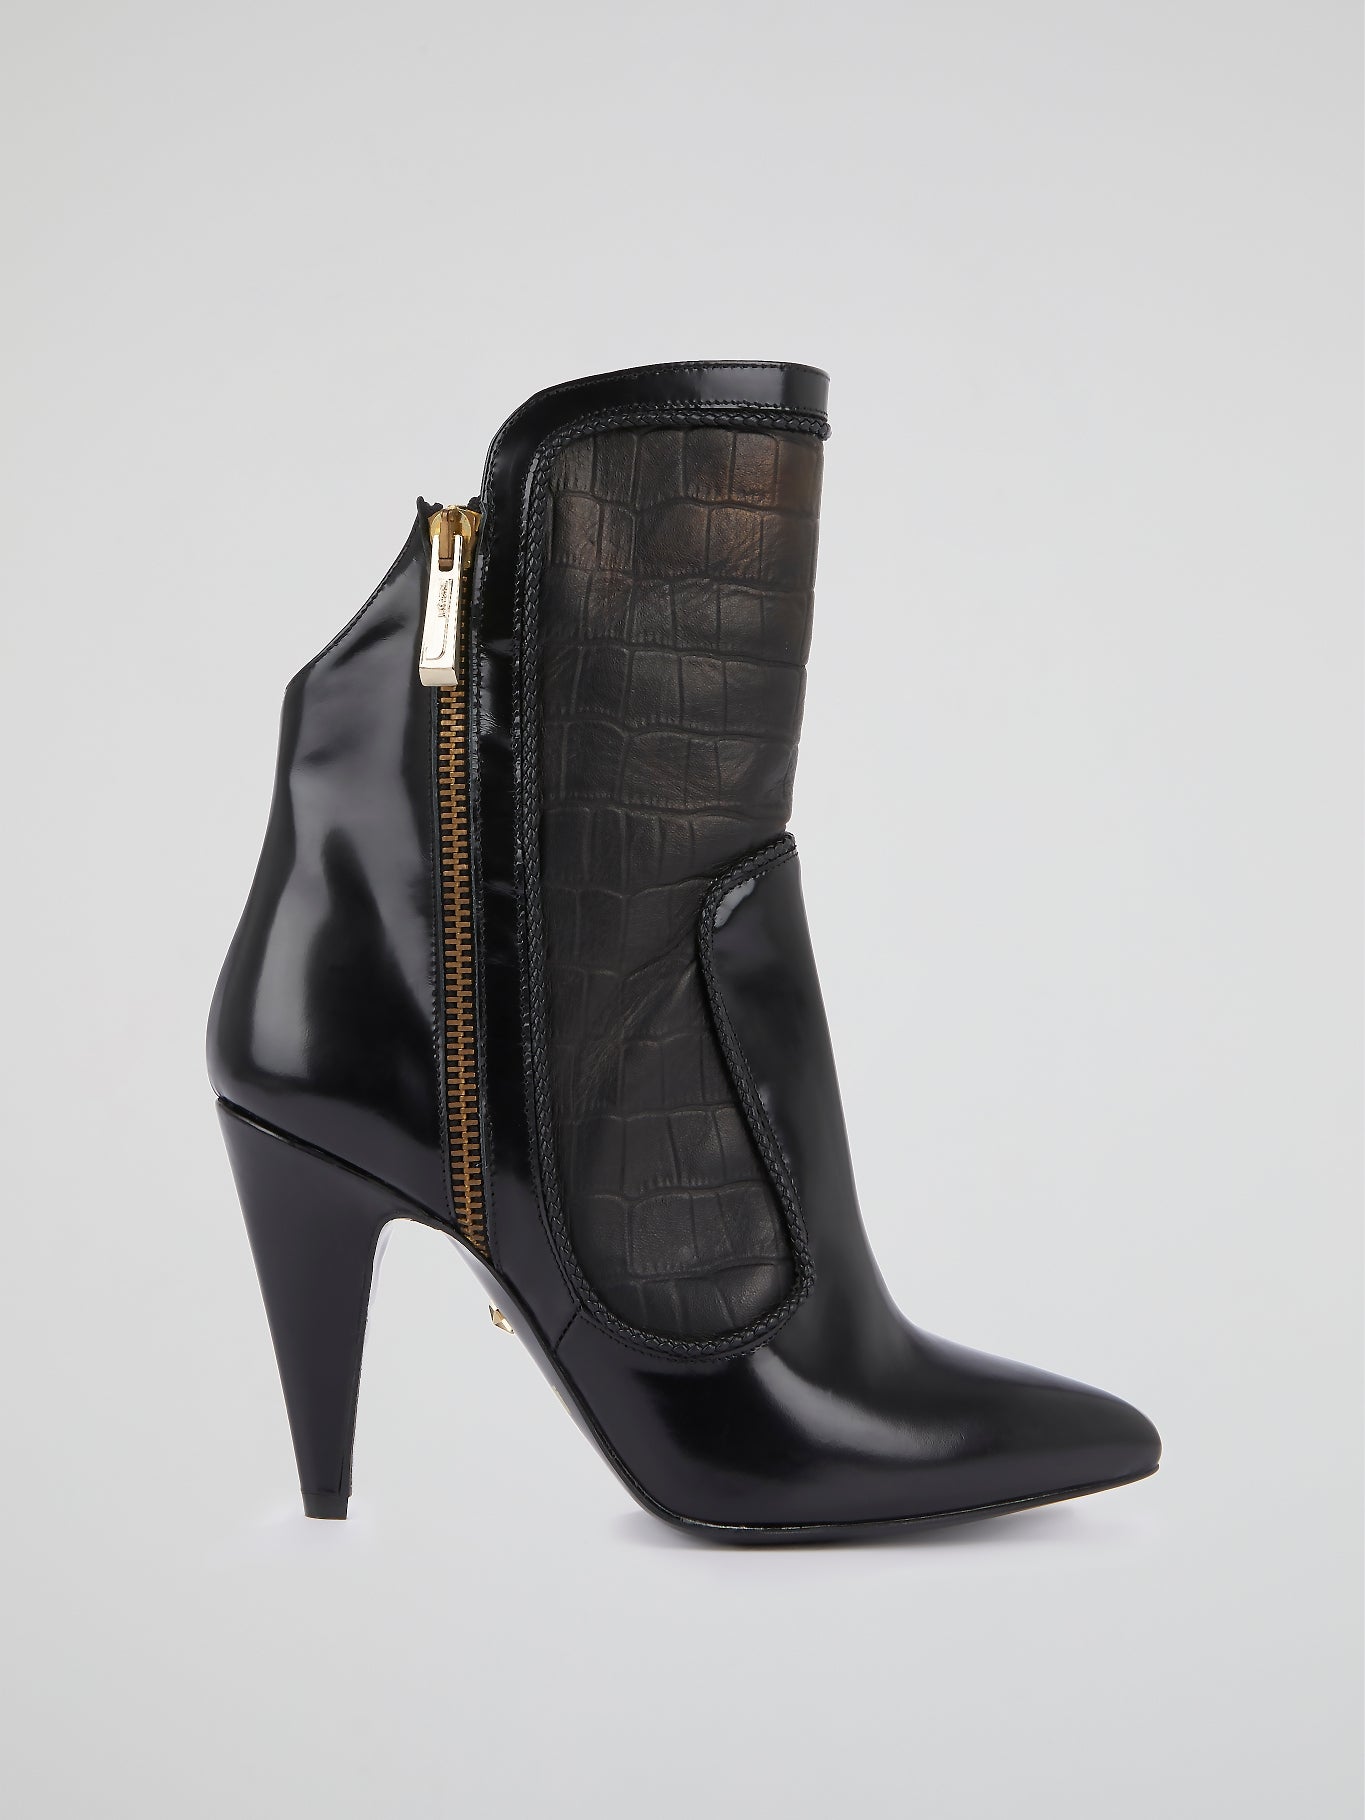 Black Reptilian Ankle Boots